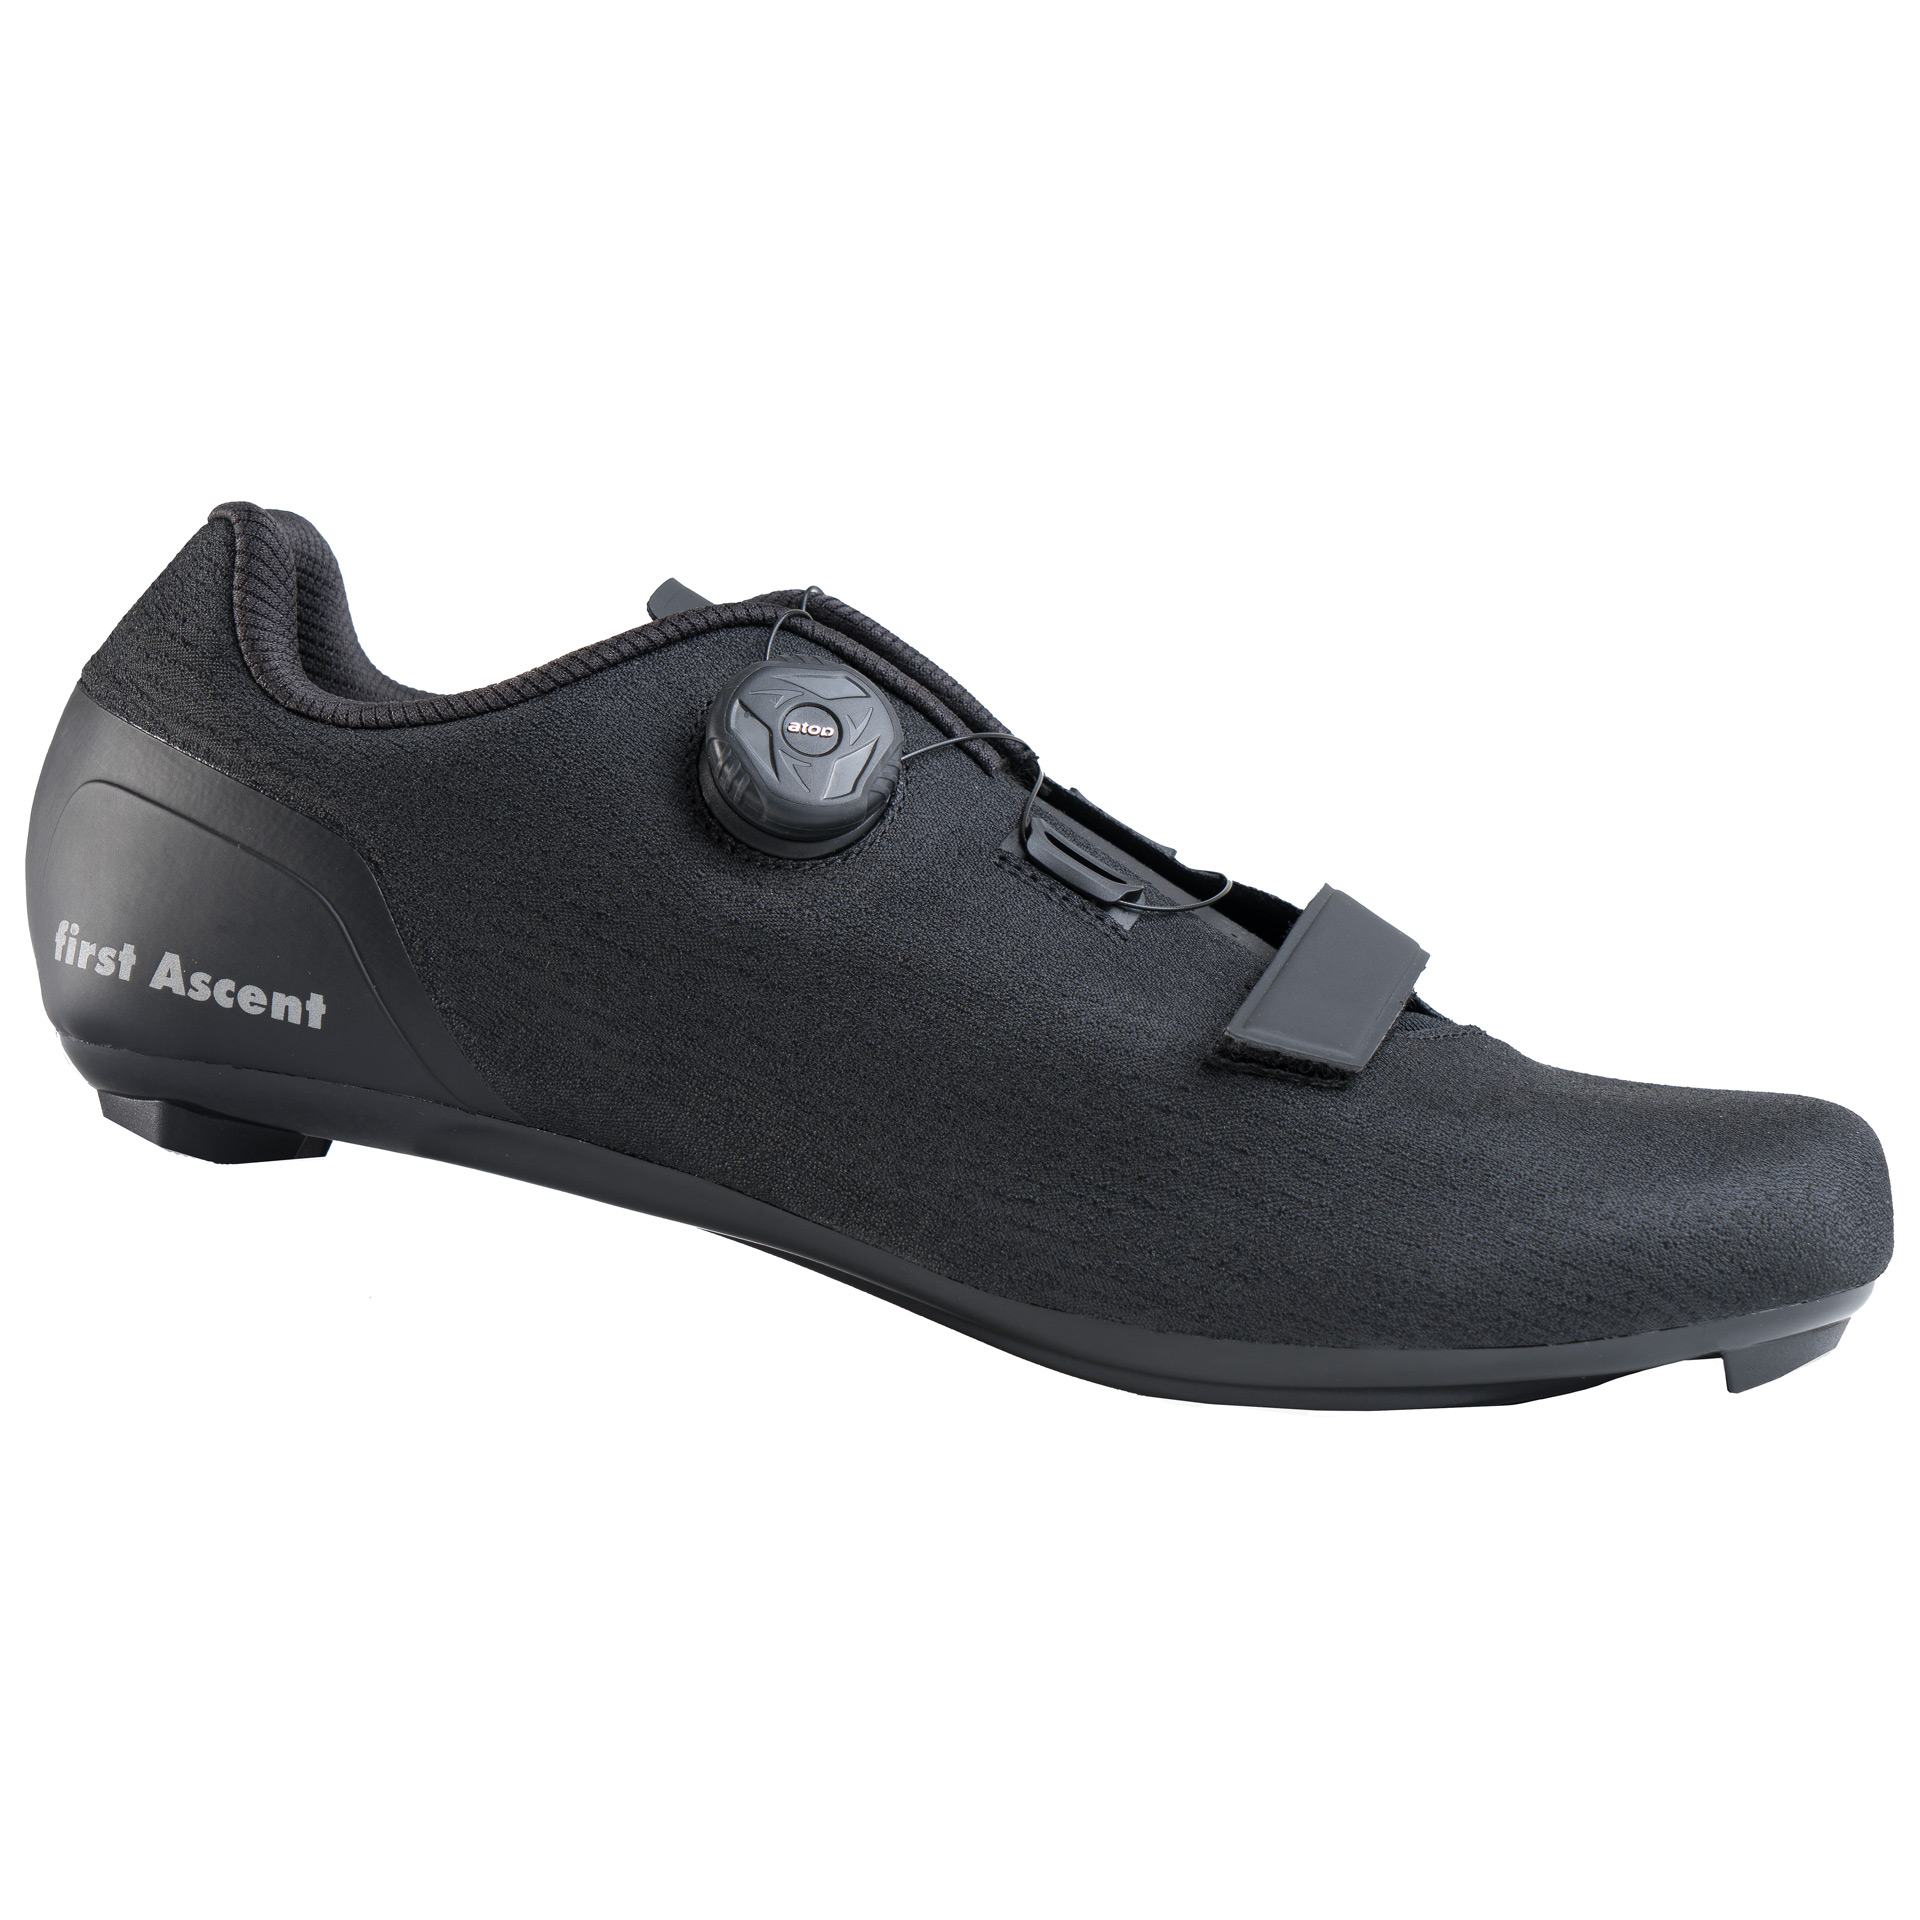 Vent Road Cycling Shoes - First Ascent